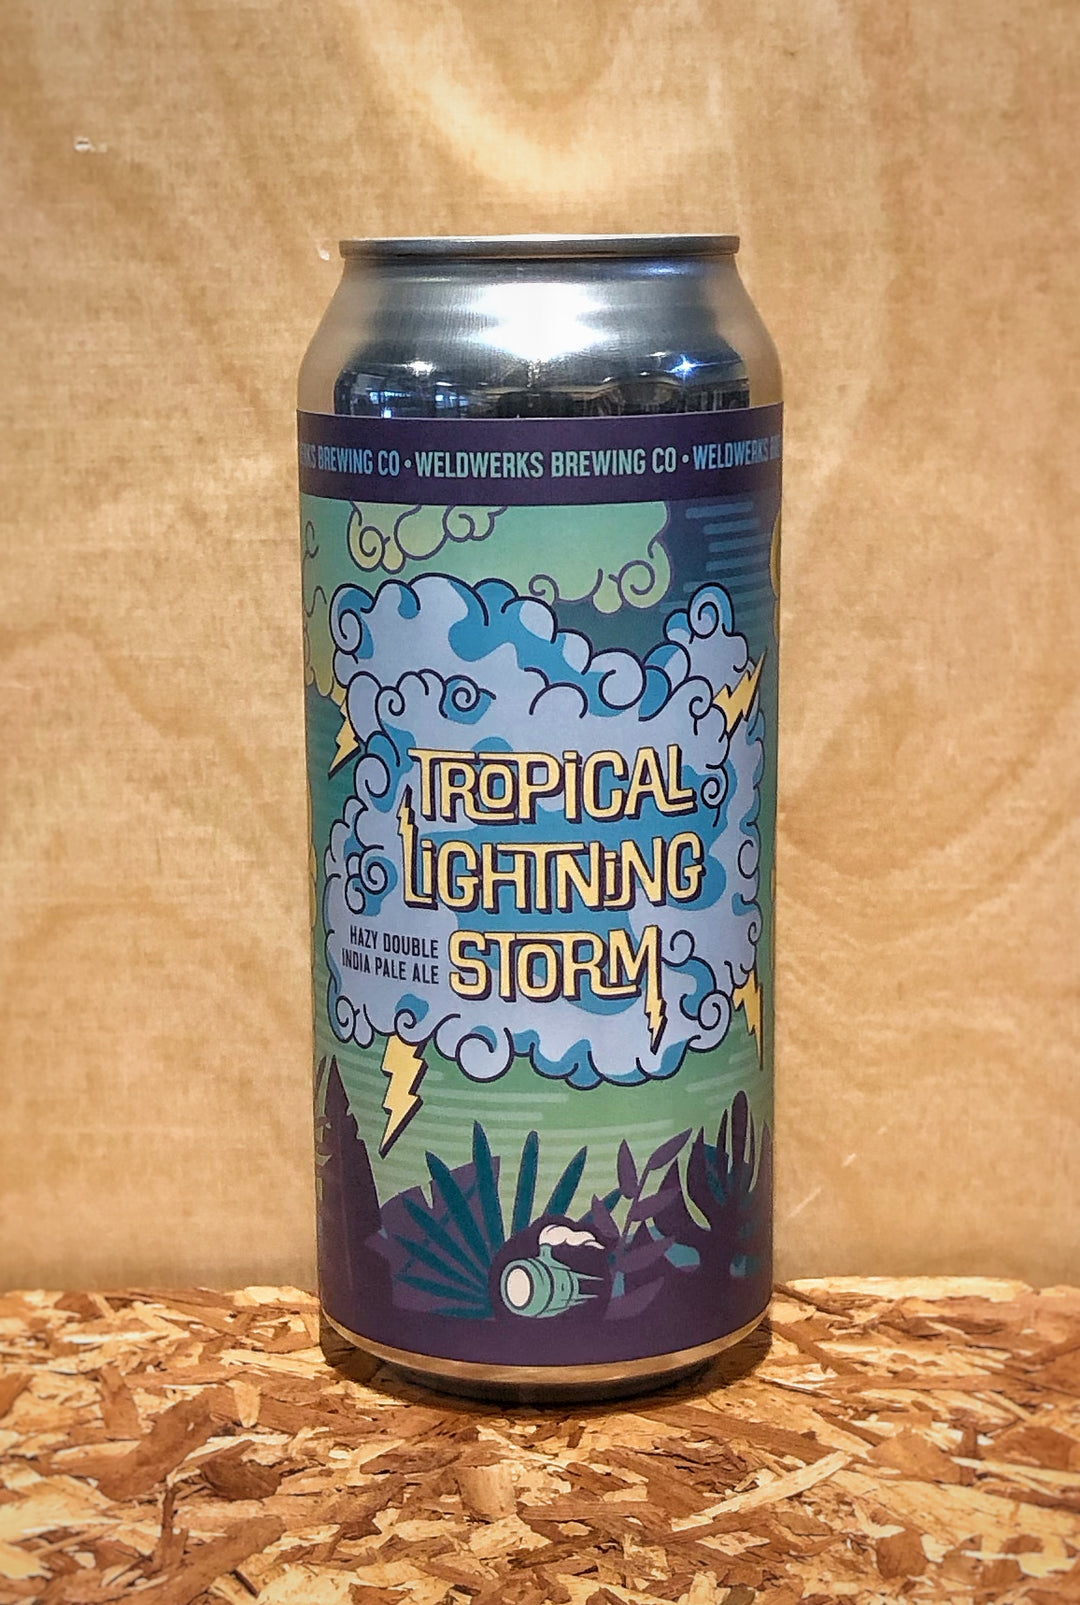 WeldWerks Brewing Co. 'Tropical Lightning Storm' Hazy Double India Pale Ale (Greeley, CO)